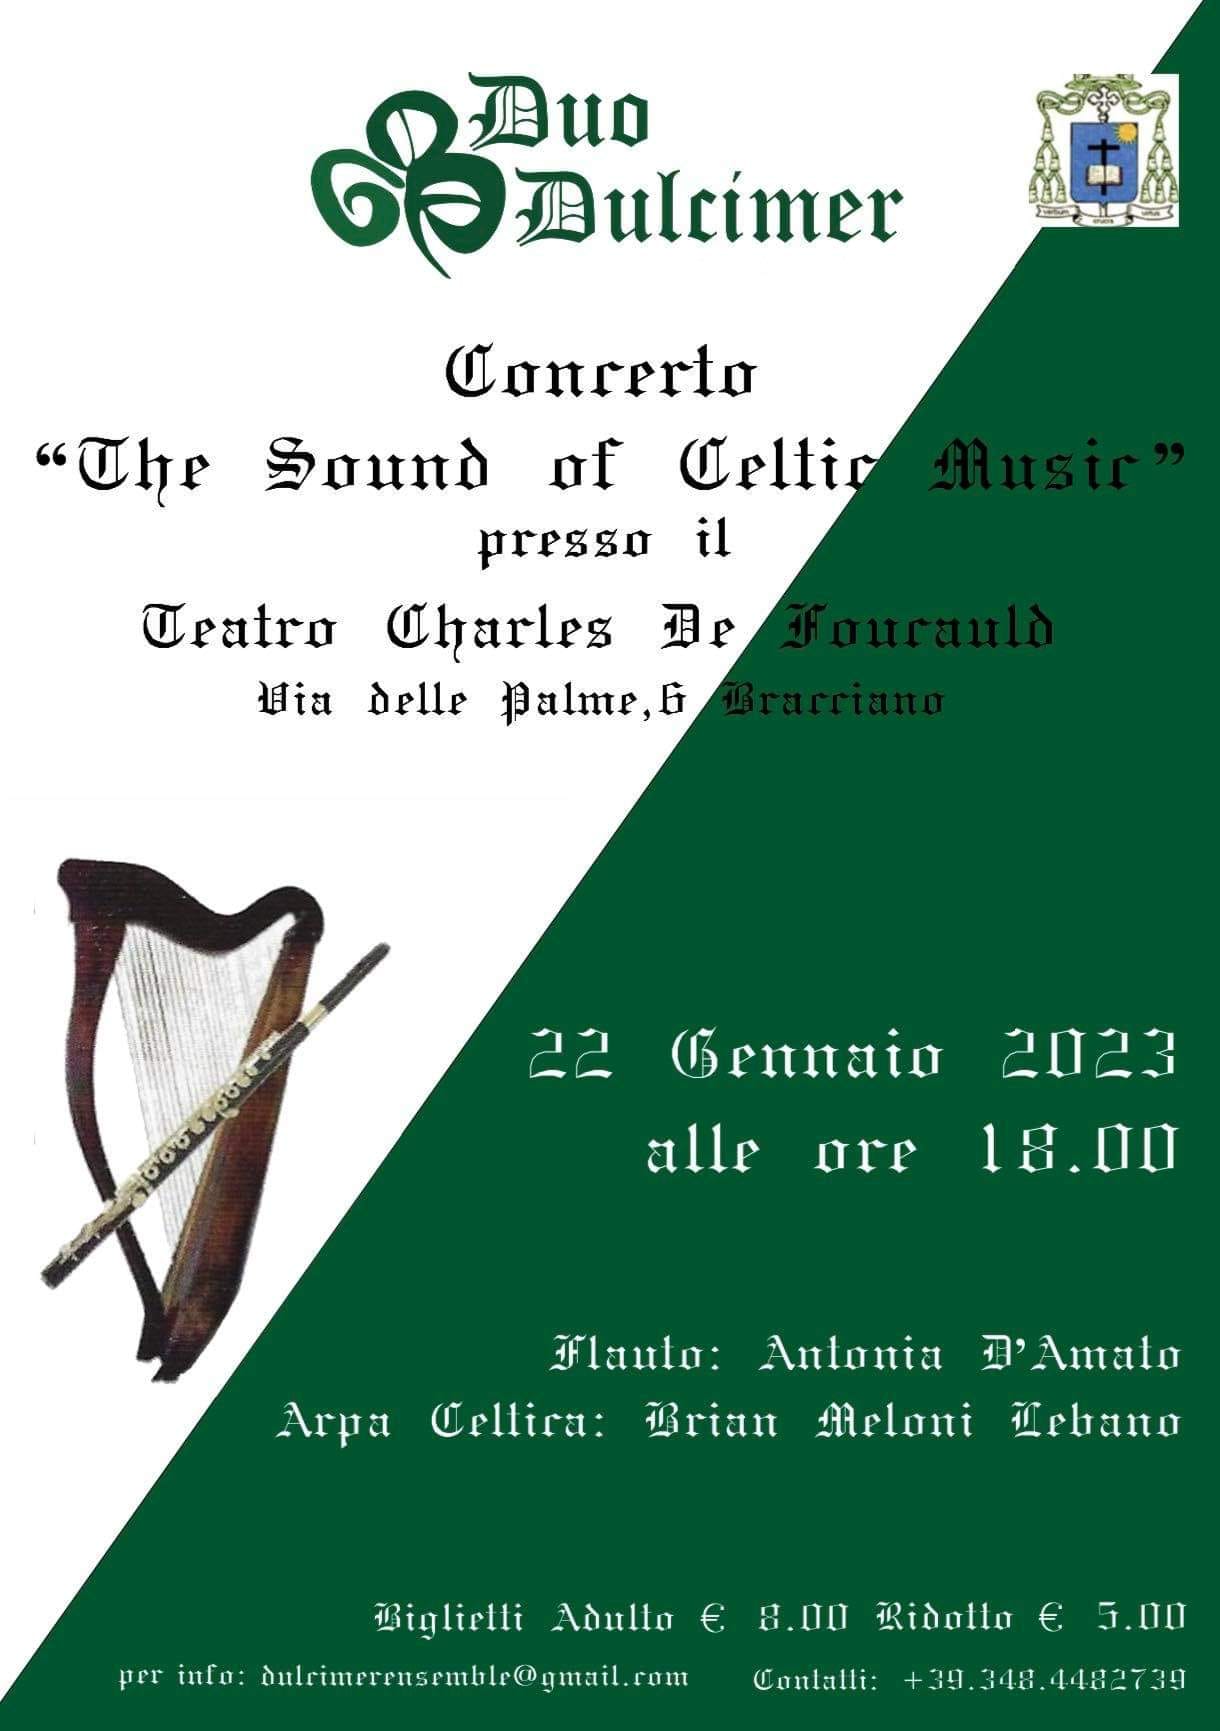 “The Sound of Celtic Music”